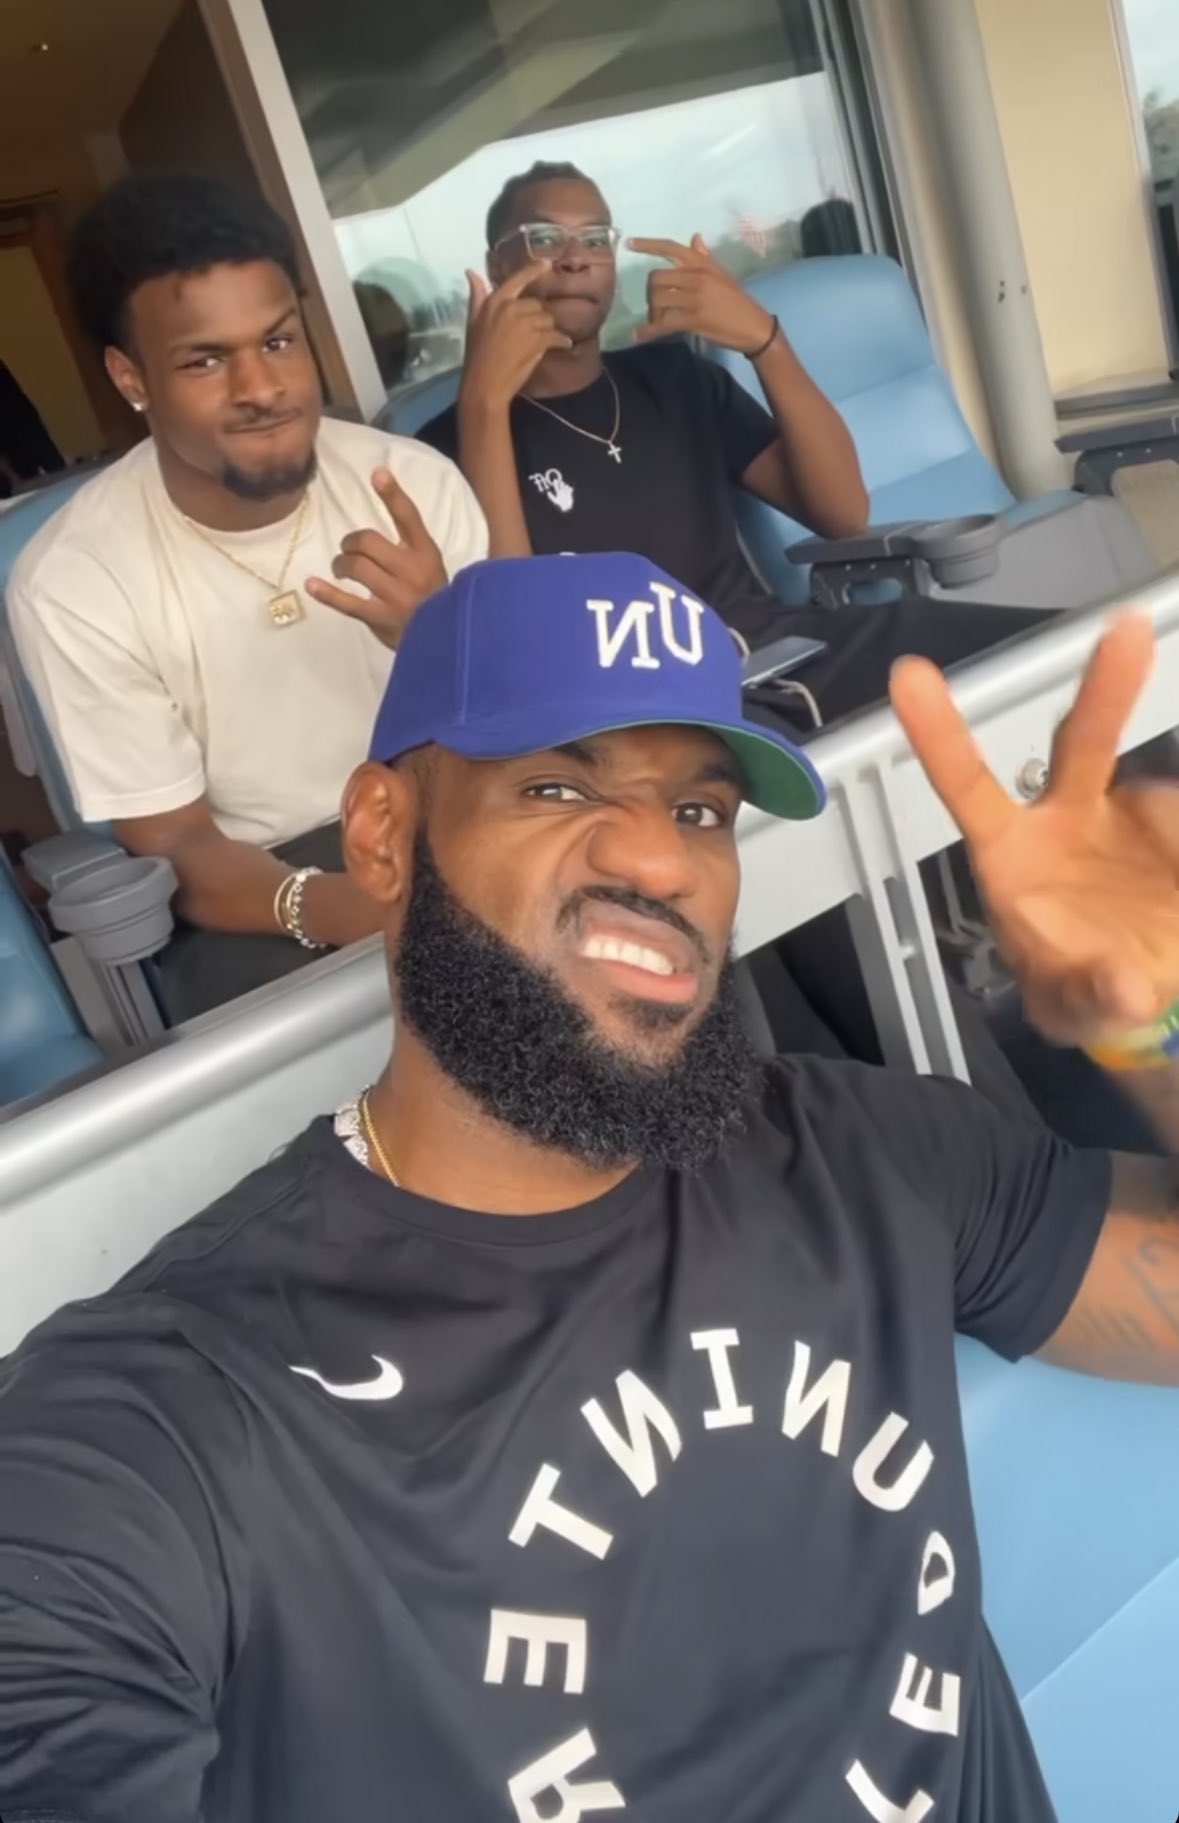 LeBron, Bronny, and the rest of the James family attended a Dodgers game on his bobblehead night